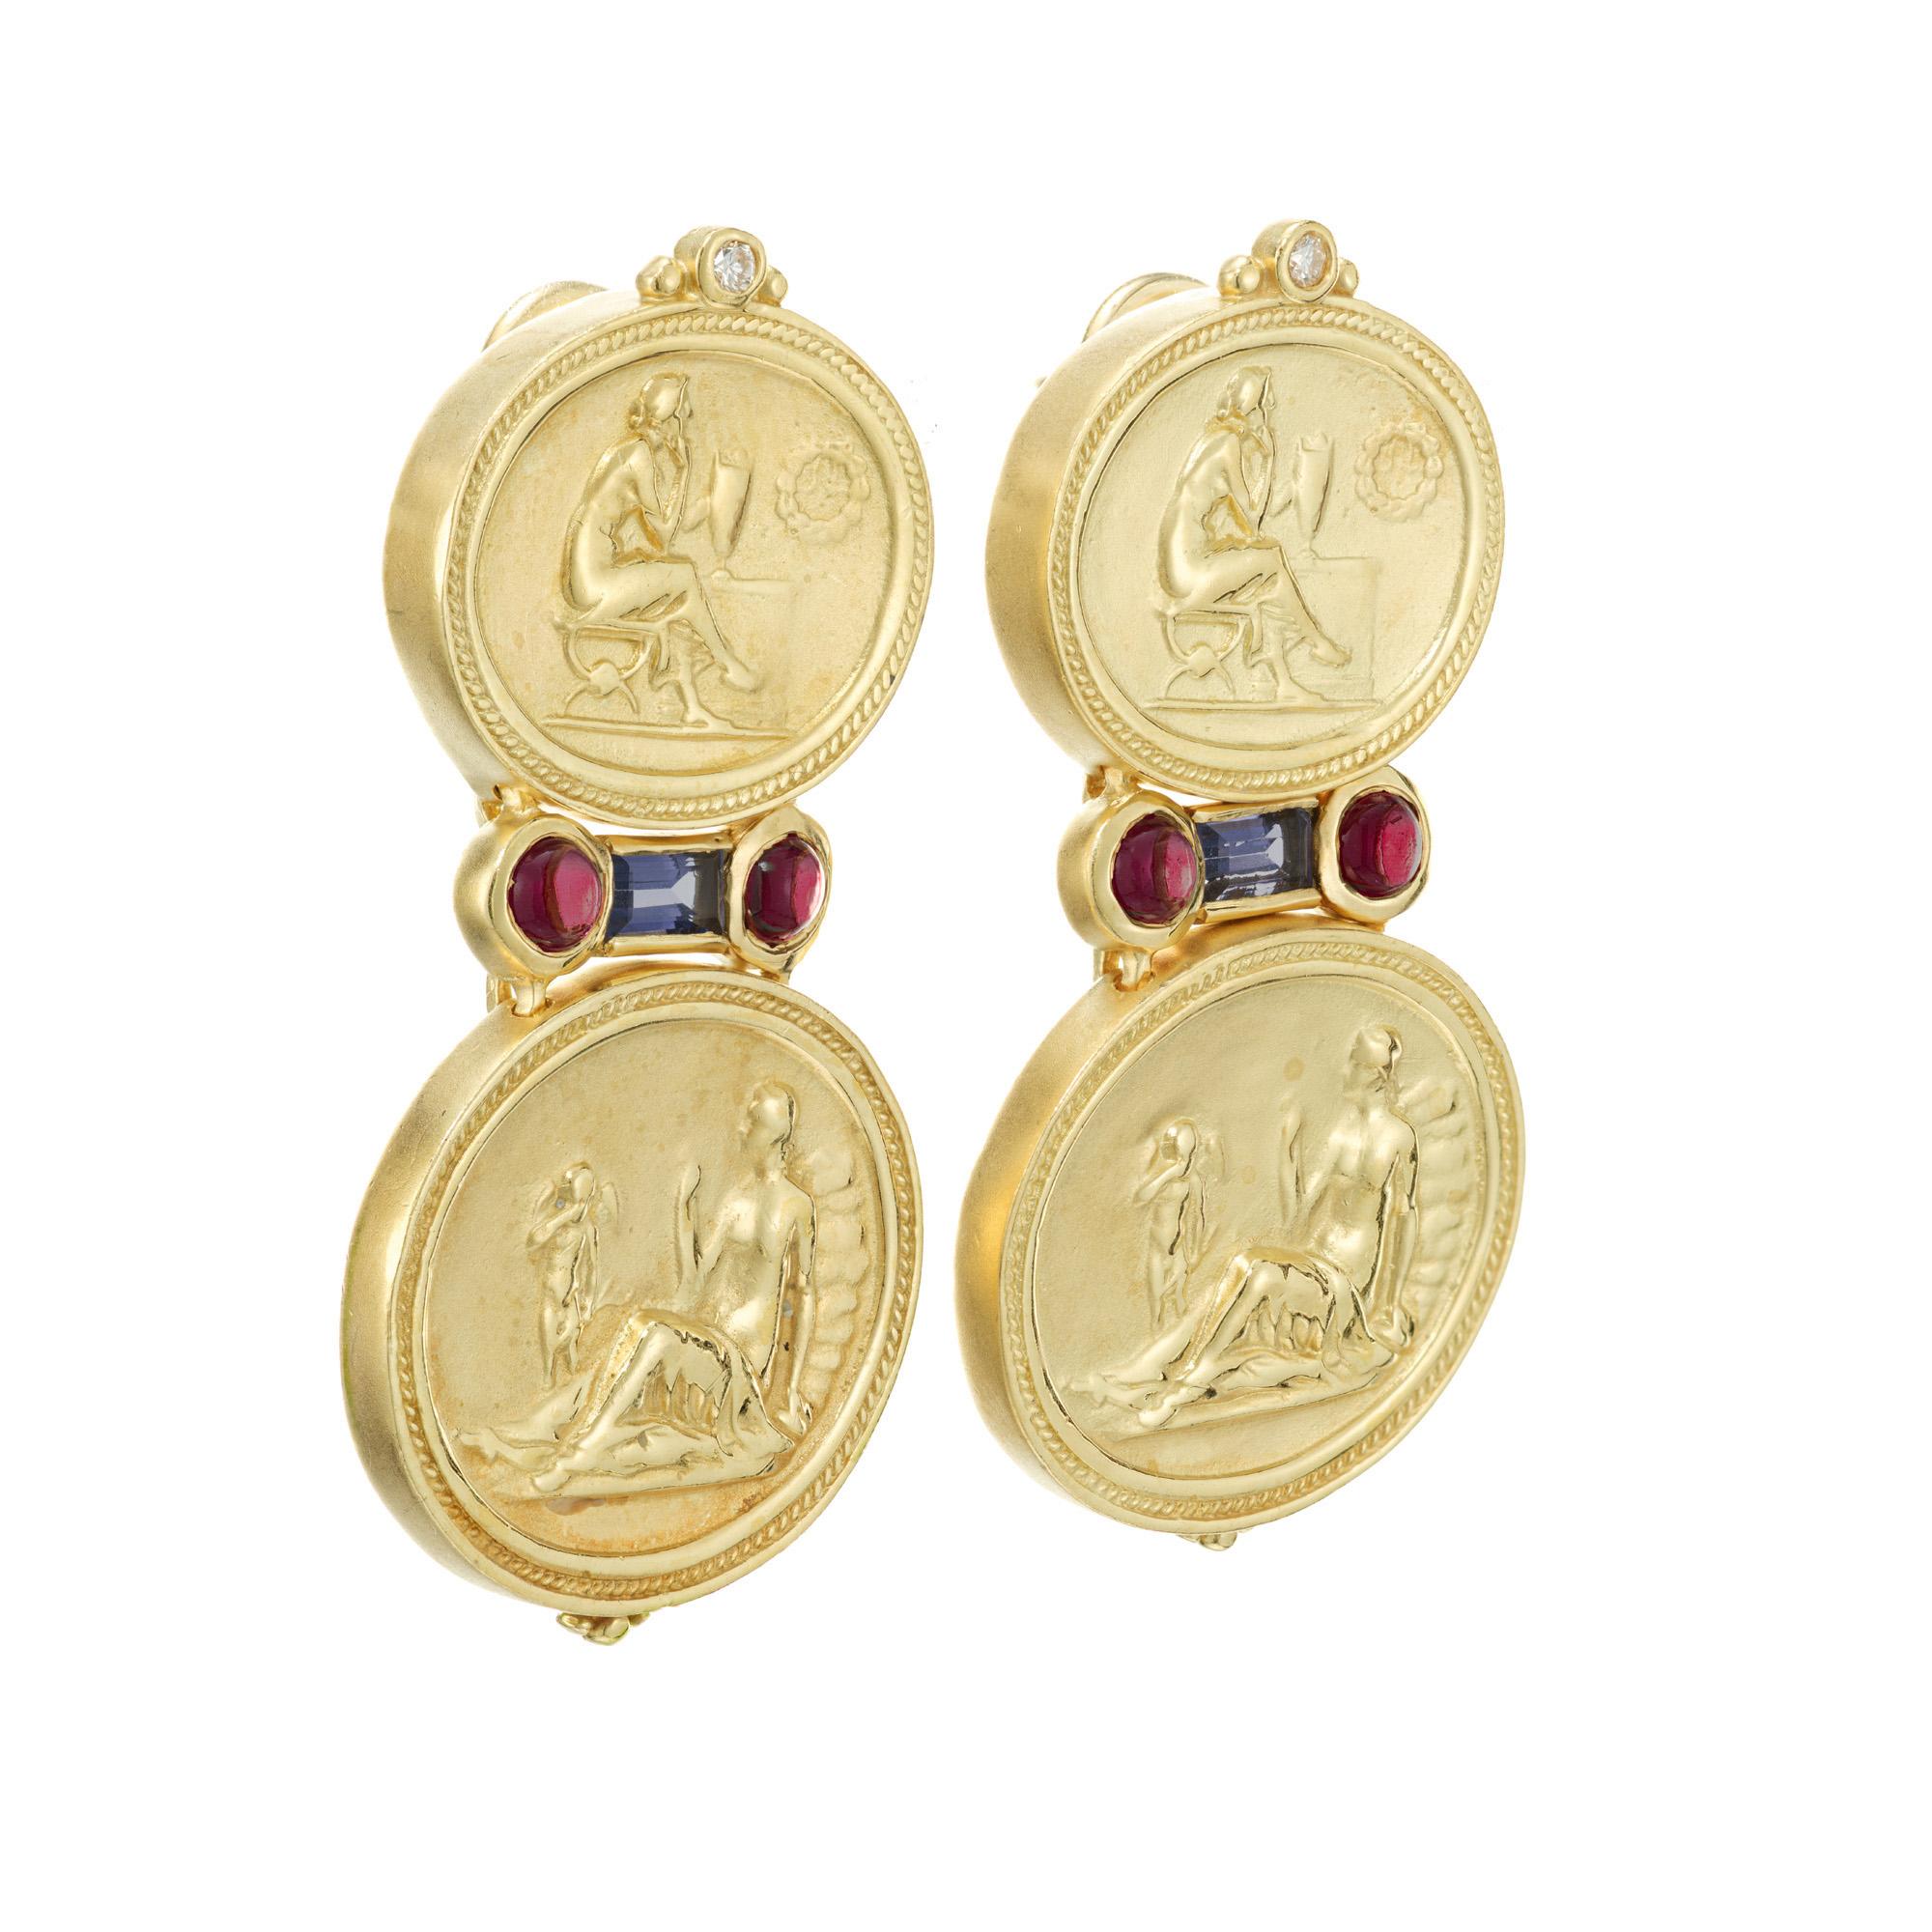 Detailed textured Seidengang dangle earrings. 18k yellow gold portrait oval discs accented with 4 round pinkish red cabochon garnets, 2 round cut diamonds and 2 purplish blue baguette Iolites. 

4 round pinkish red cabochon garnets, approx. .40cts
2